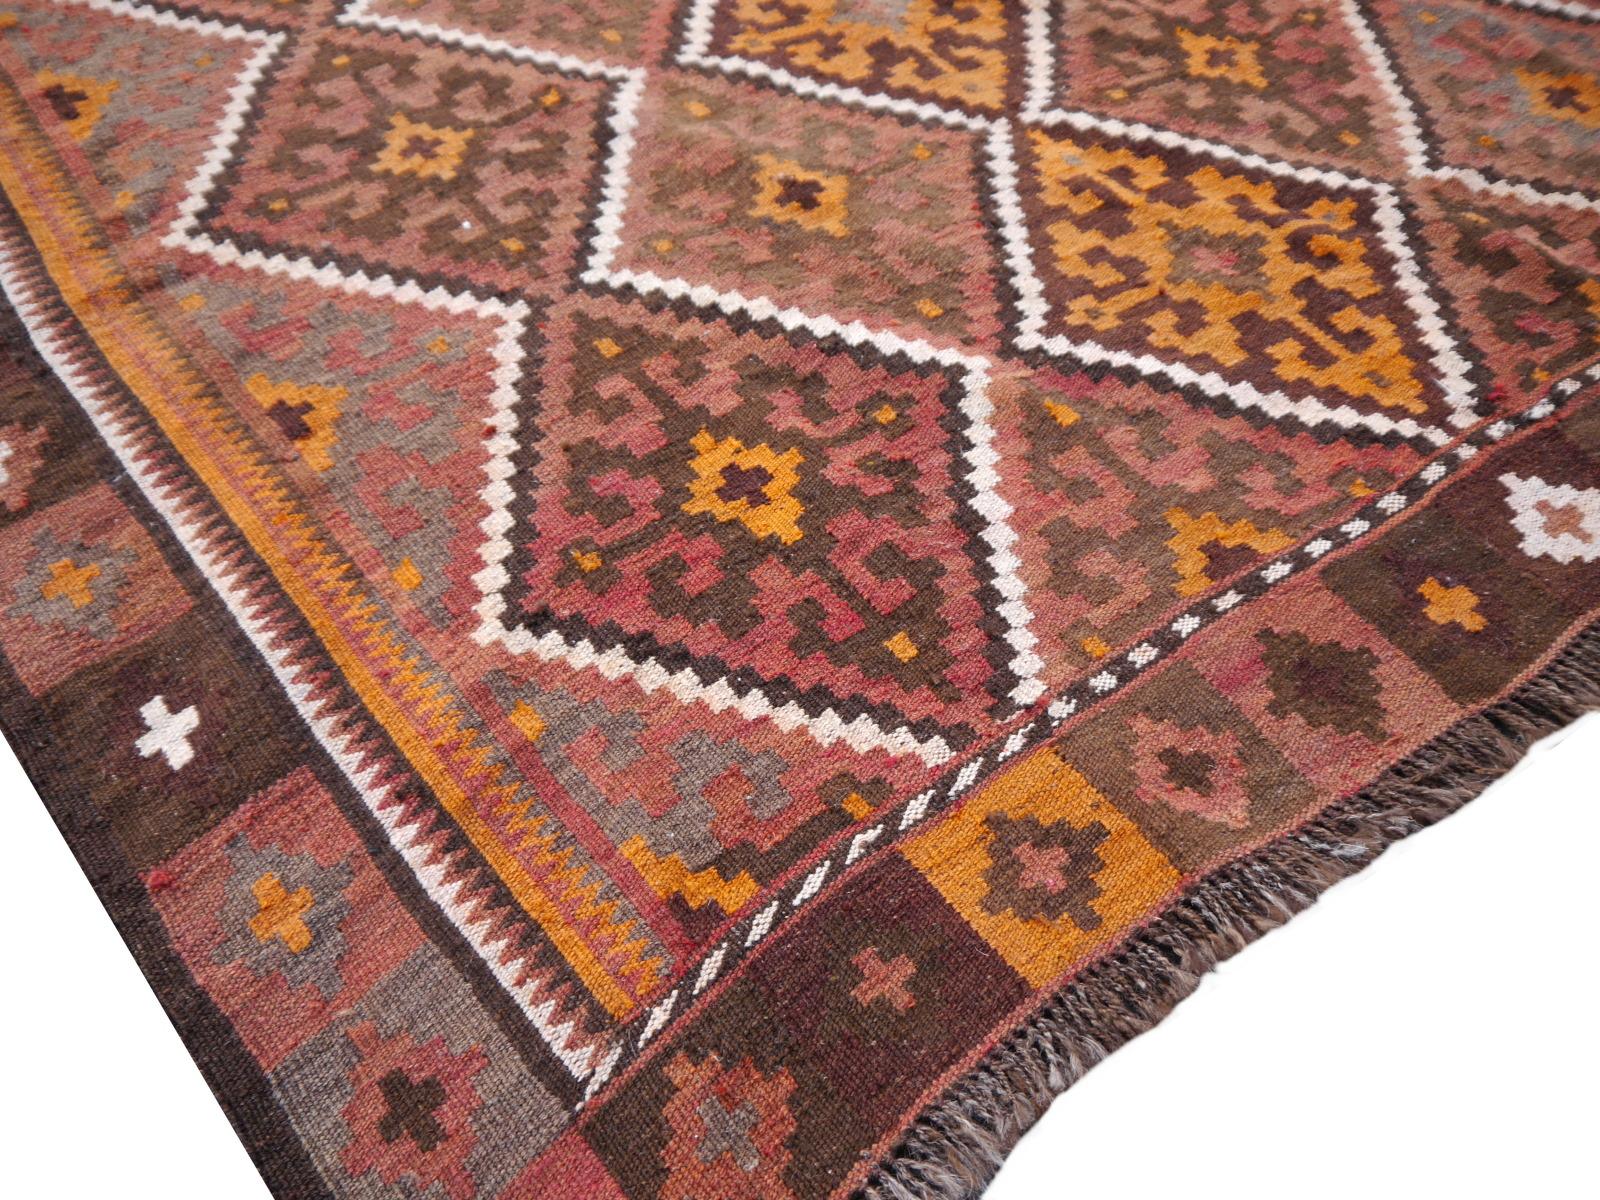 Great color and quality vintage kilim rug from Afghanistan.
Fine hand-woven Turkman Kilim rug or Turkmen rug

Beautiful vintage tribal Kilim carpet in great condition. This rug was made by the Kizil ayak tribe. Other well known tribes are Tekke,